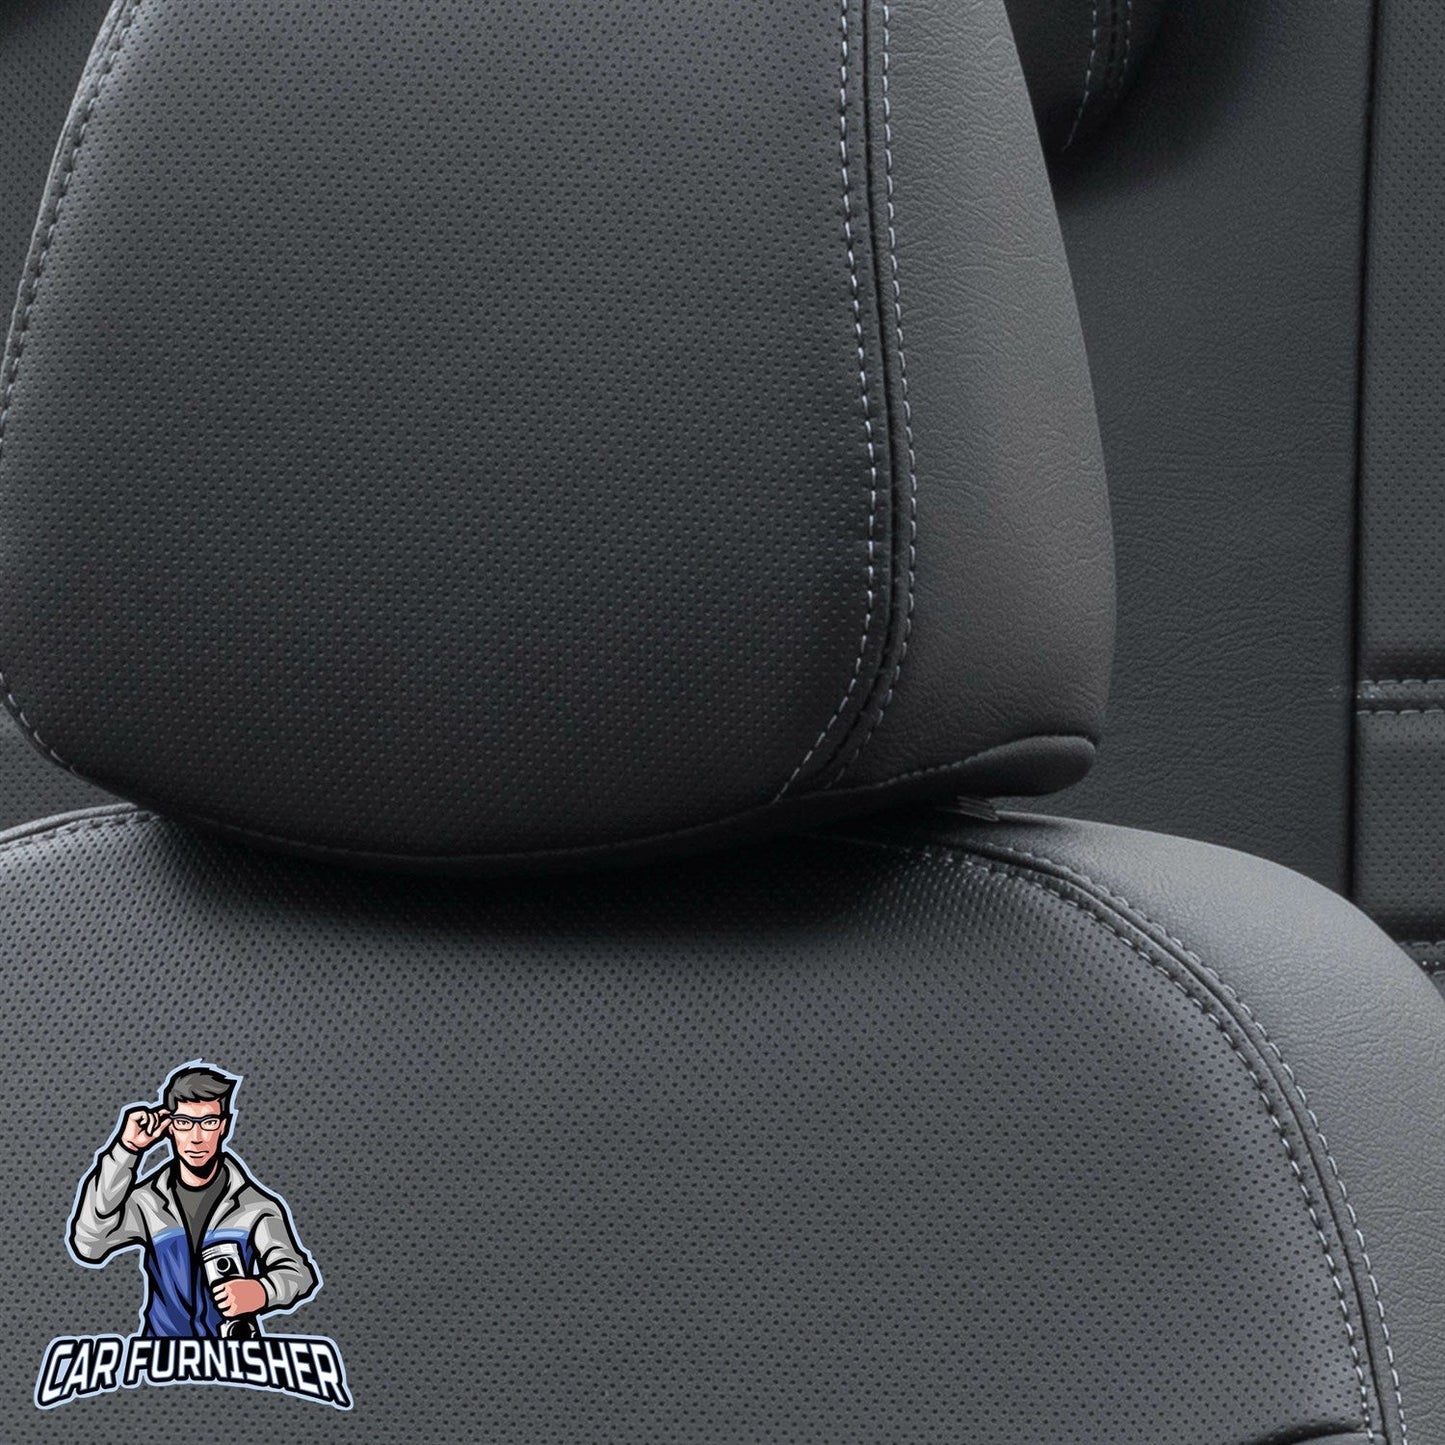 Mazda BT50 Seat Covers Istanbul Leather Design Black Leather